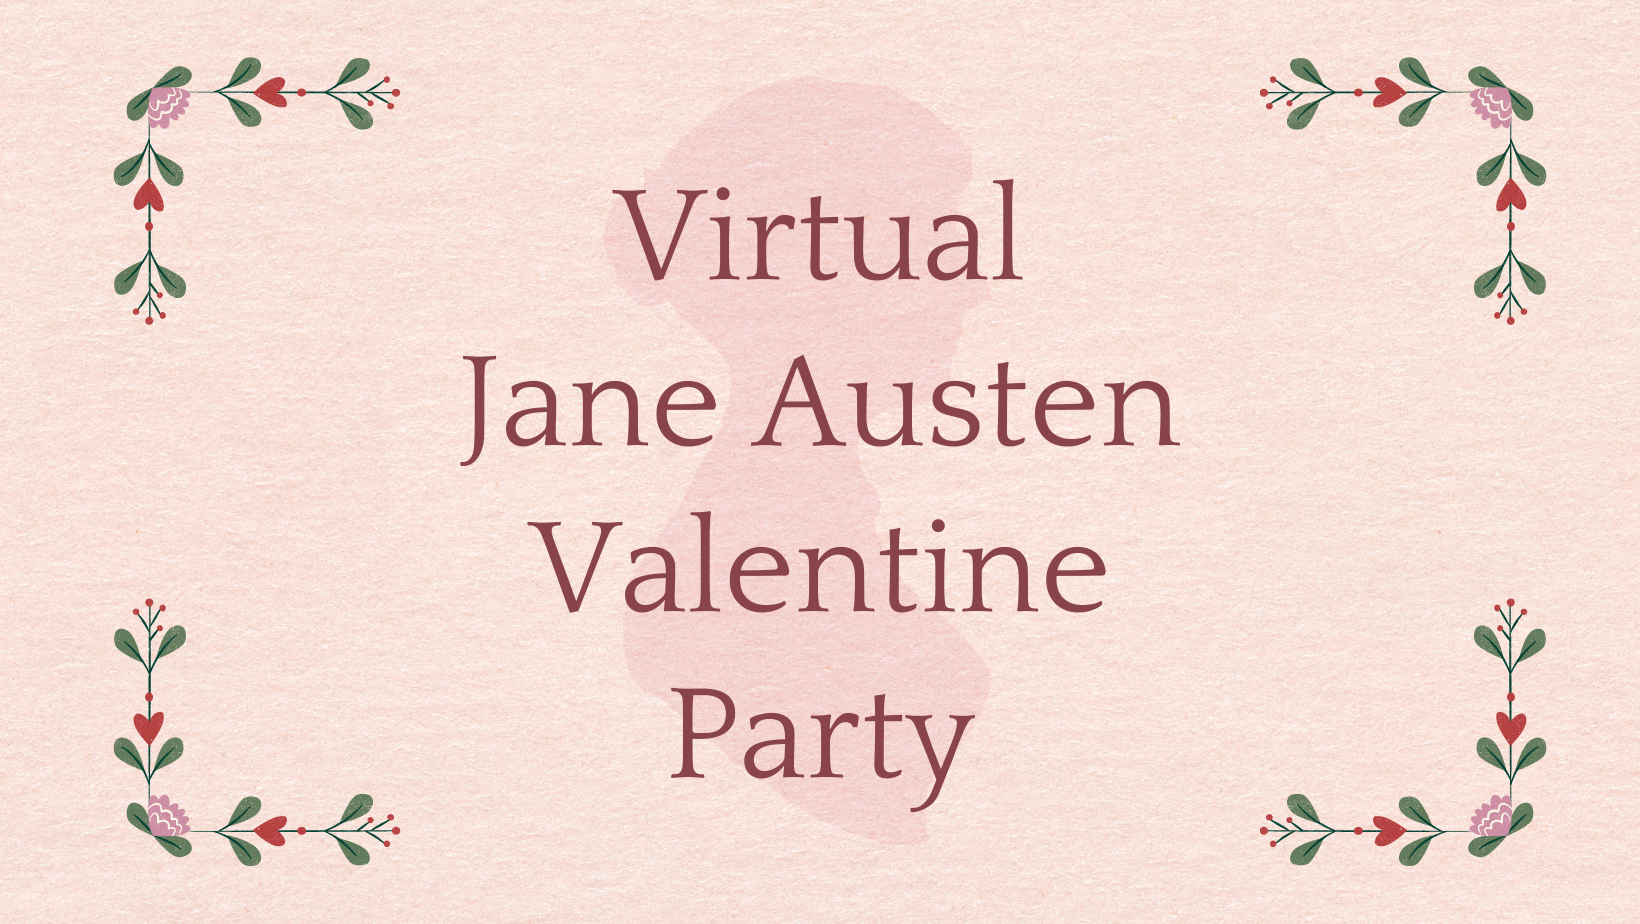 Join Our Virtual Jane Austen Valentine Party!